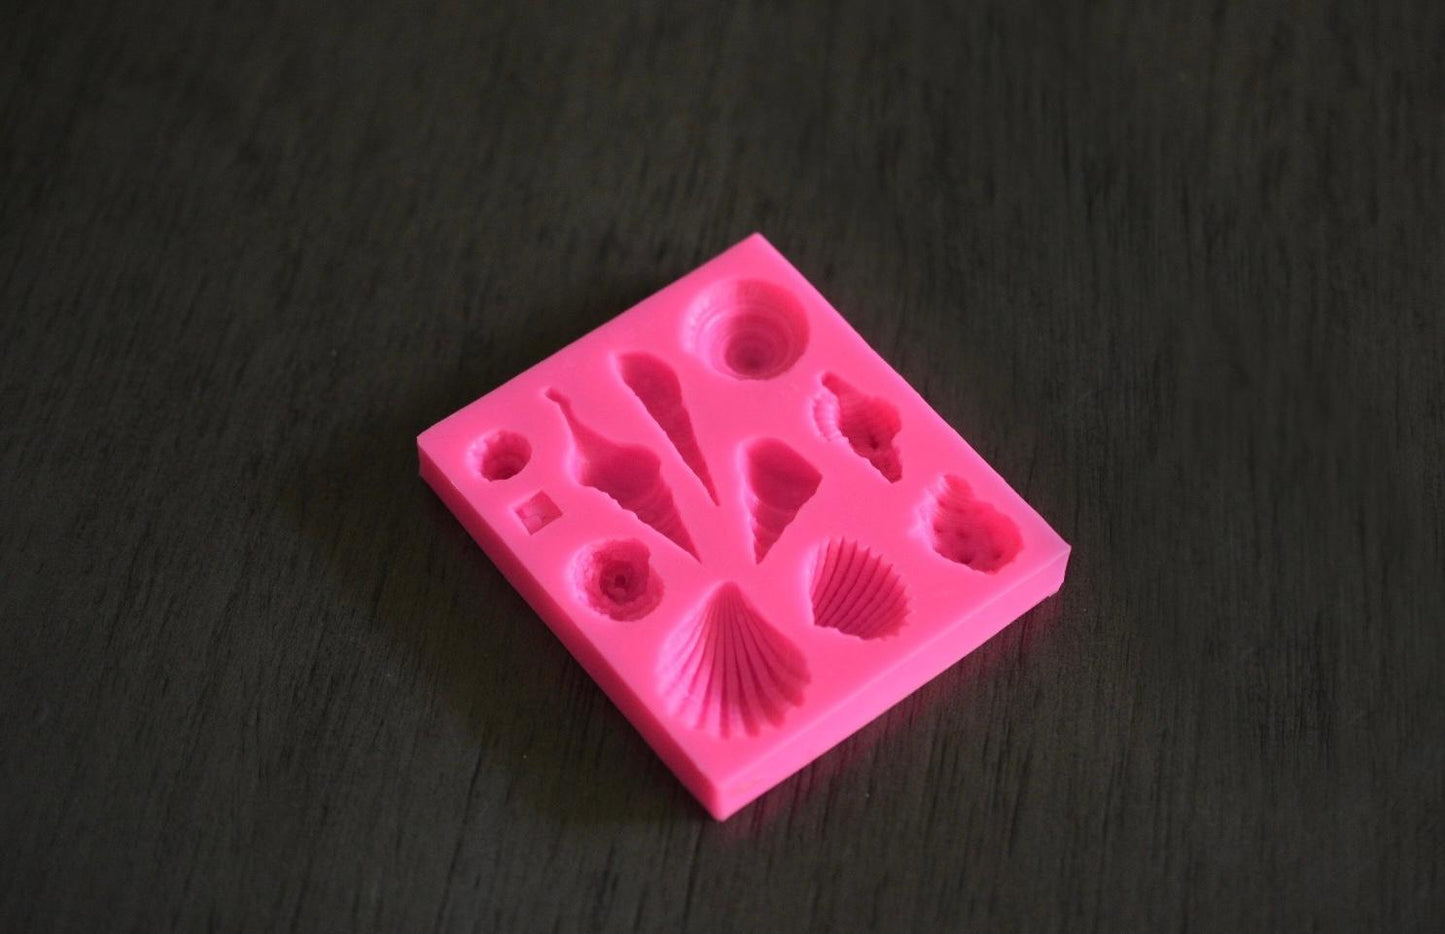 A top down view of a square soap mold with seashell designs rests on a wooden surface. The mold is pink.